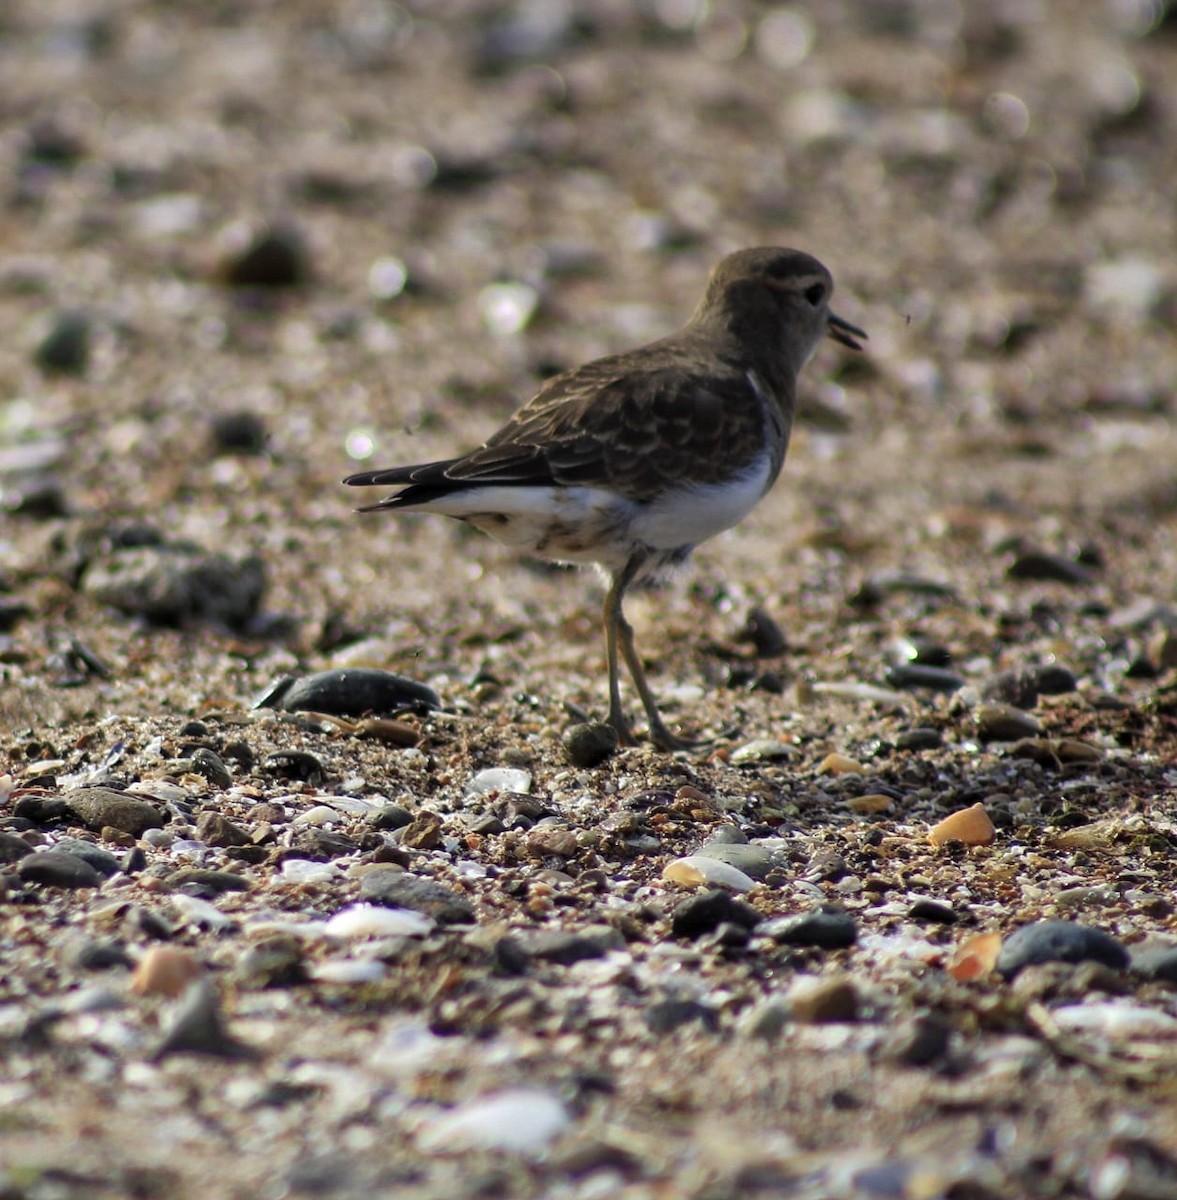 Rufous-chested Dotterel - Any Leiva